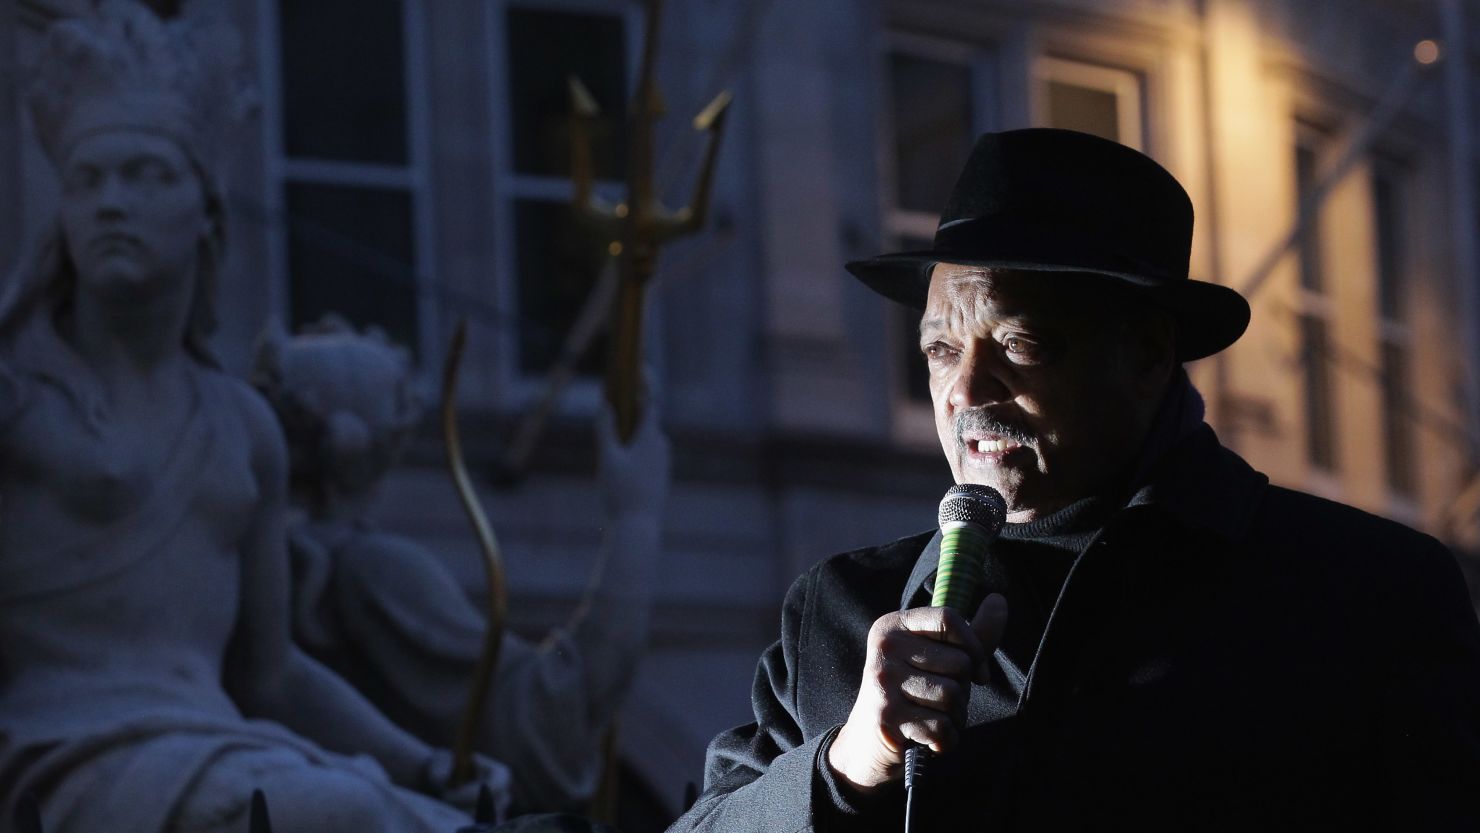 Rev. Jesse Jackson addresses the crowd at the Occupy camp, St Paul's Cathedral, London on December 15, 2011.